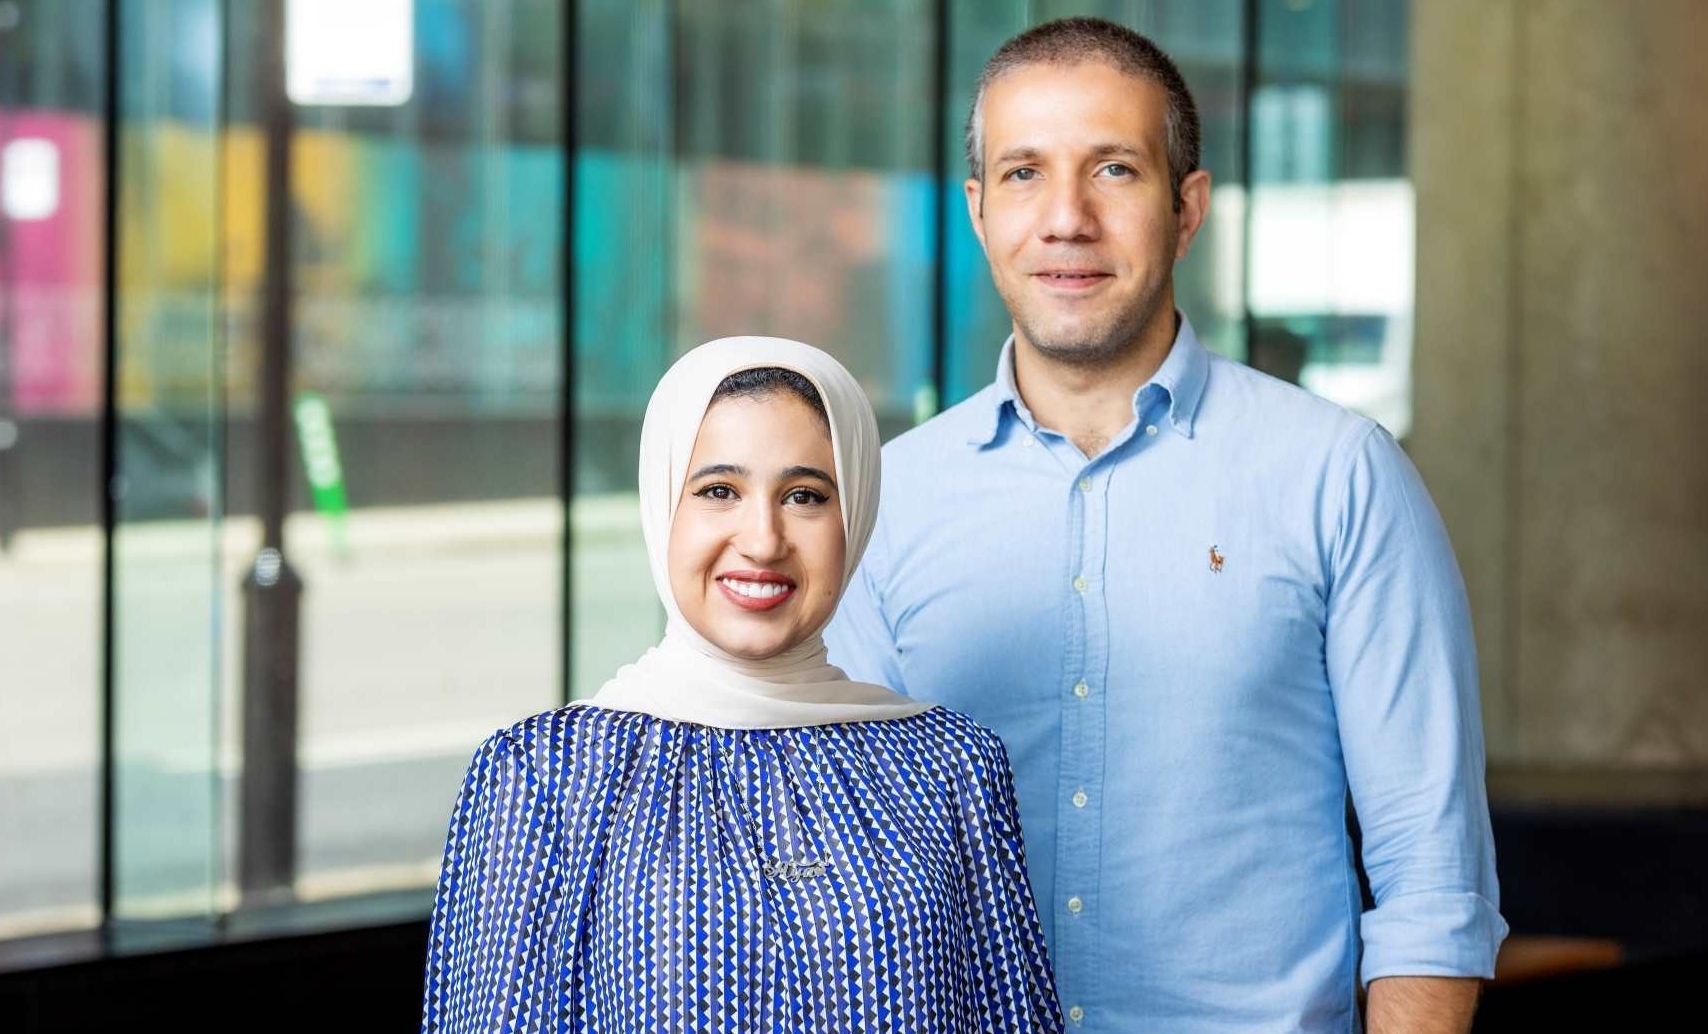 Aya Doma and Mohamed Ouf stand in front of a ground-floor window at Concordia University